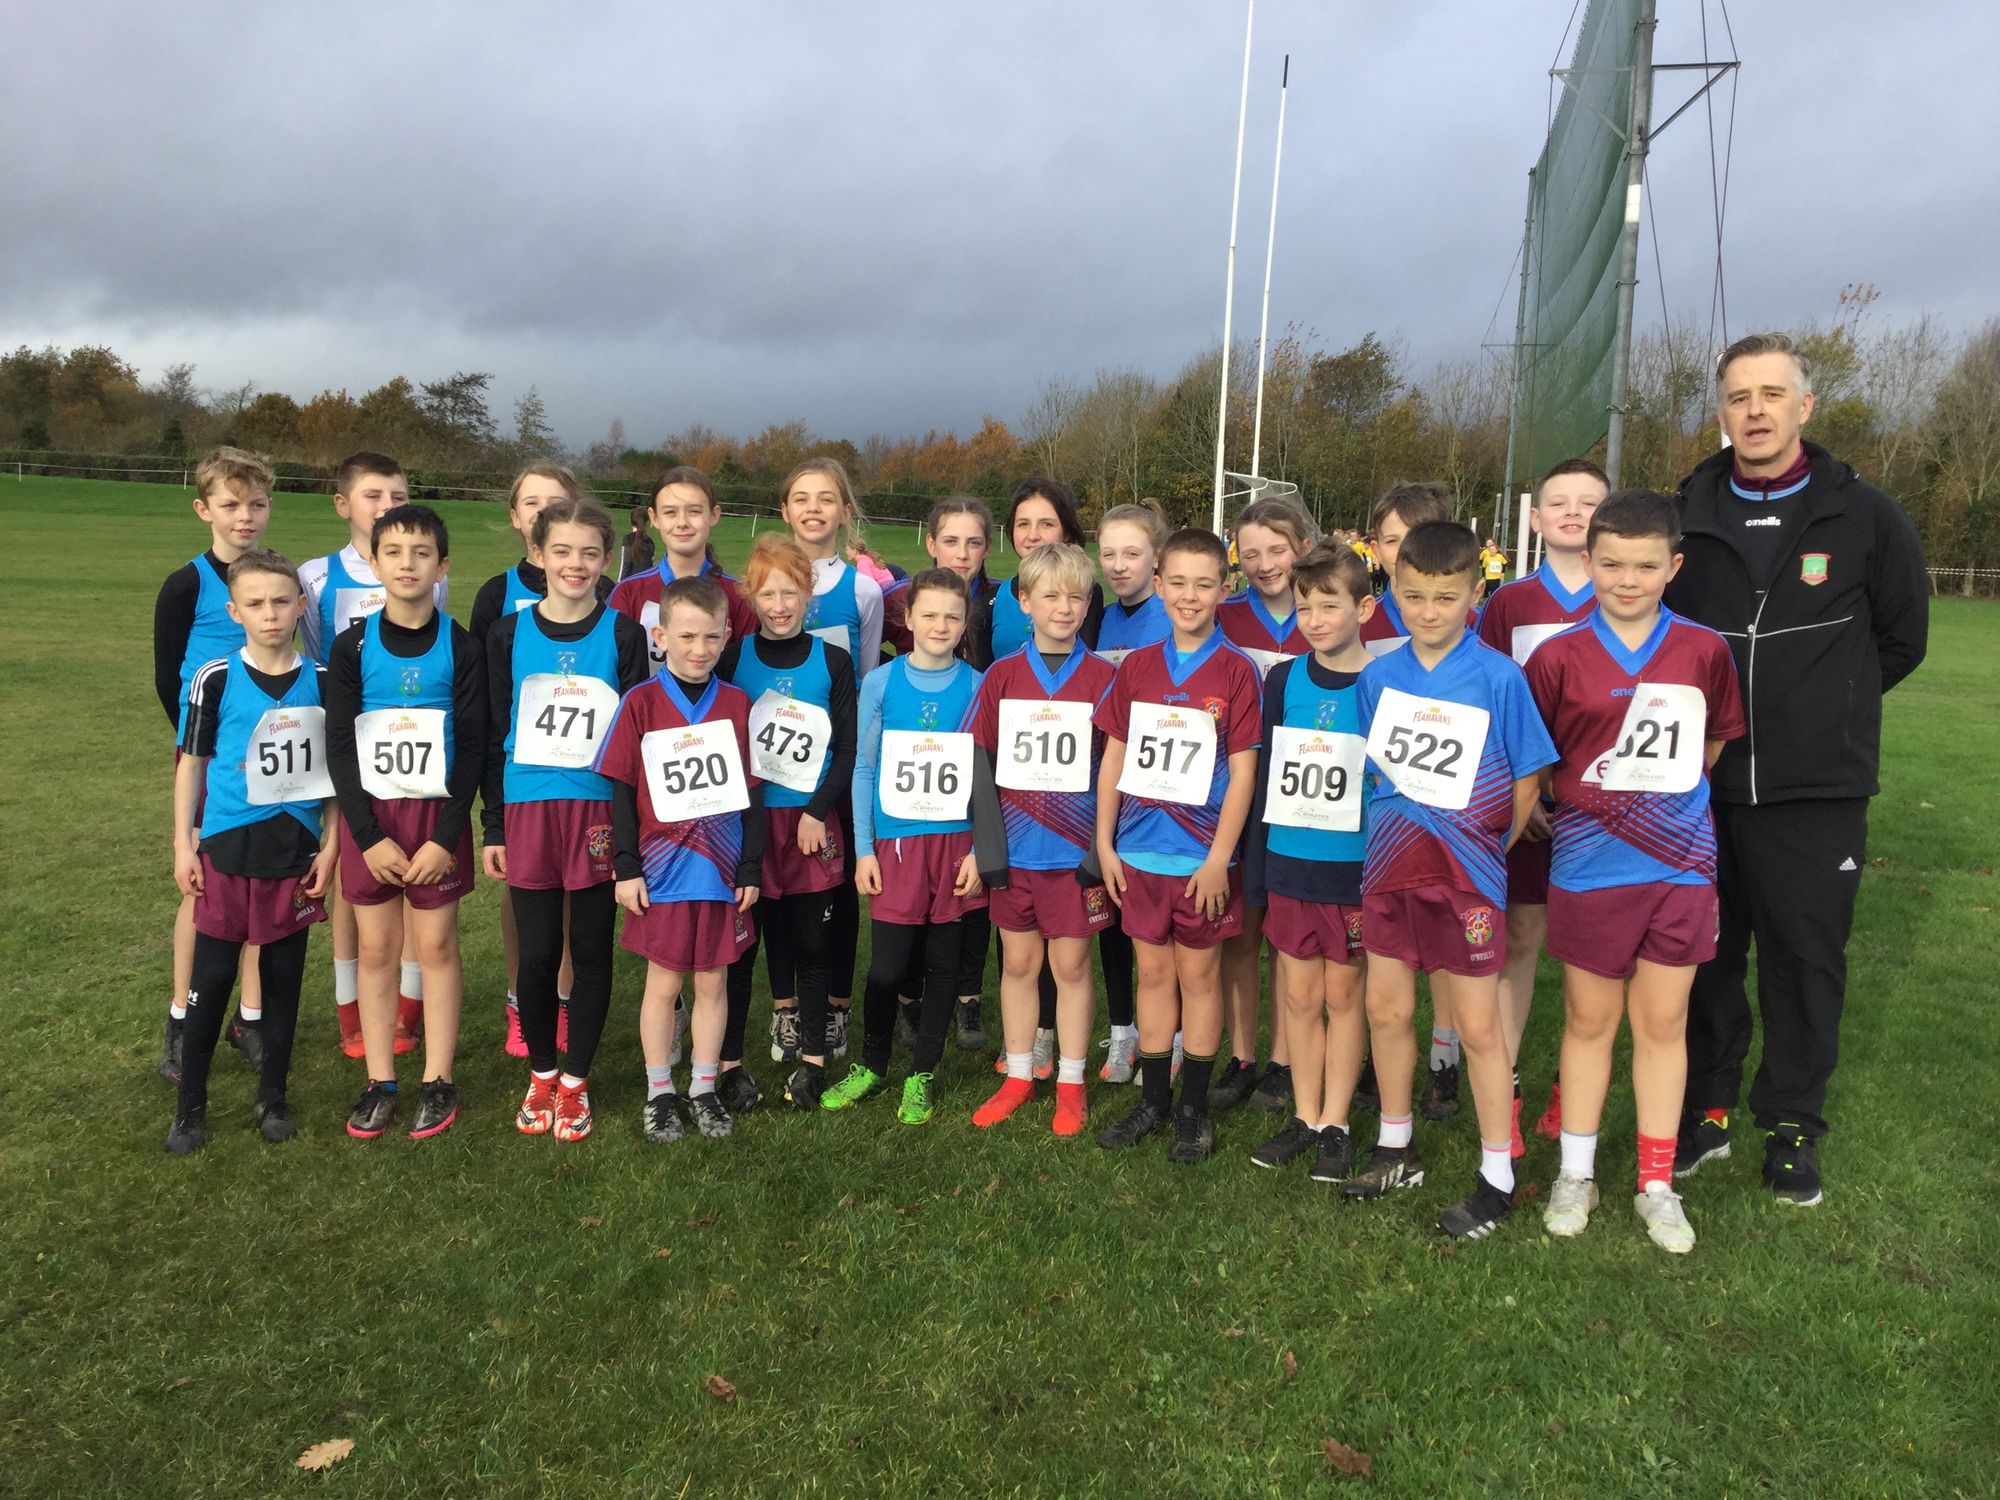 Well done to our cross country teams!